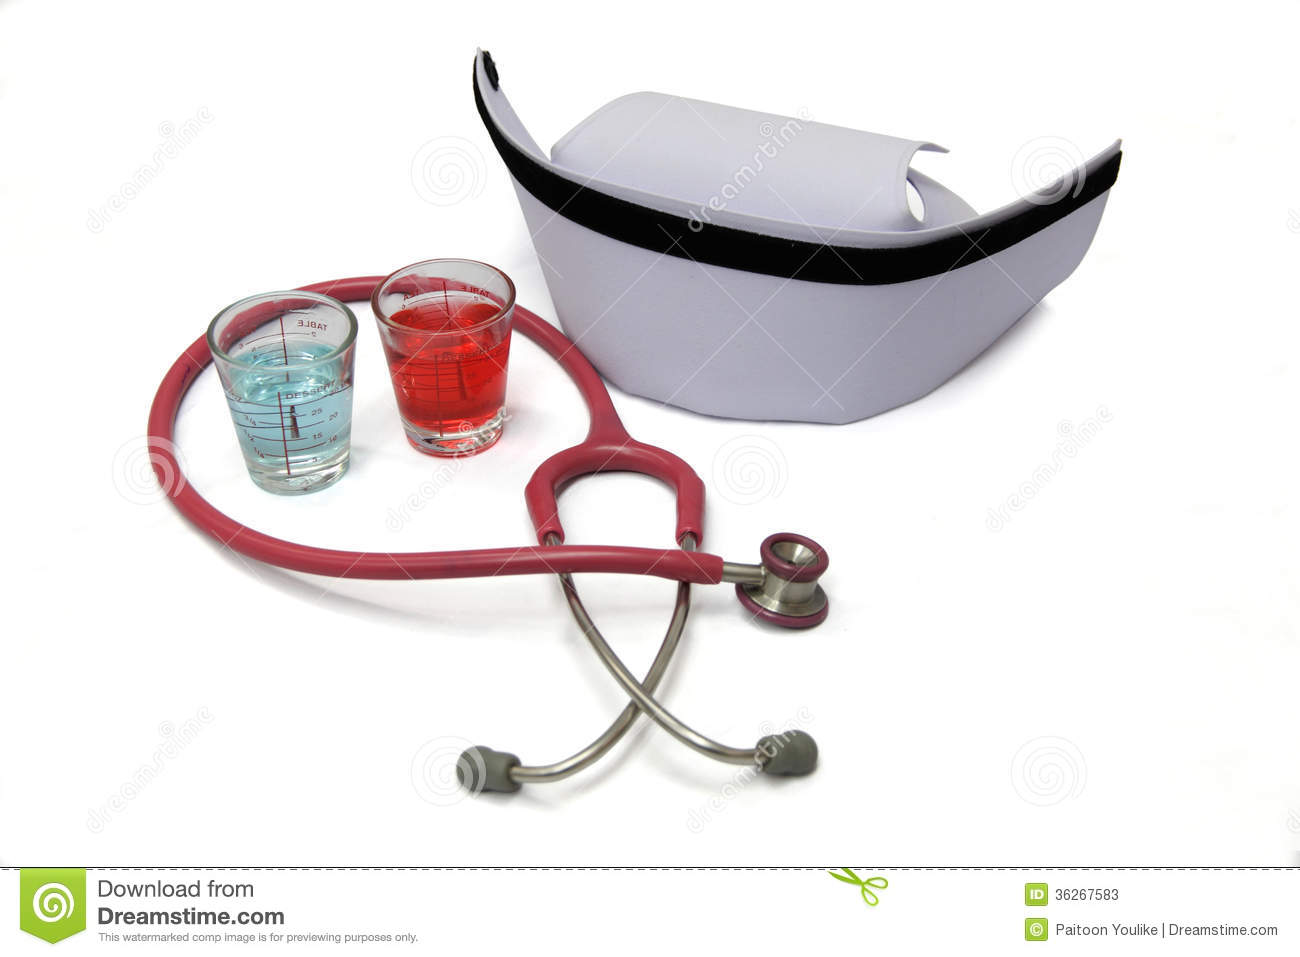 In Cup And Stethoscope Or Nurse Hat Stock Photos   Image  36267583